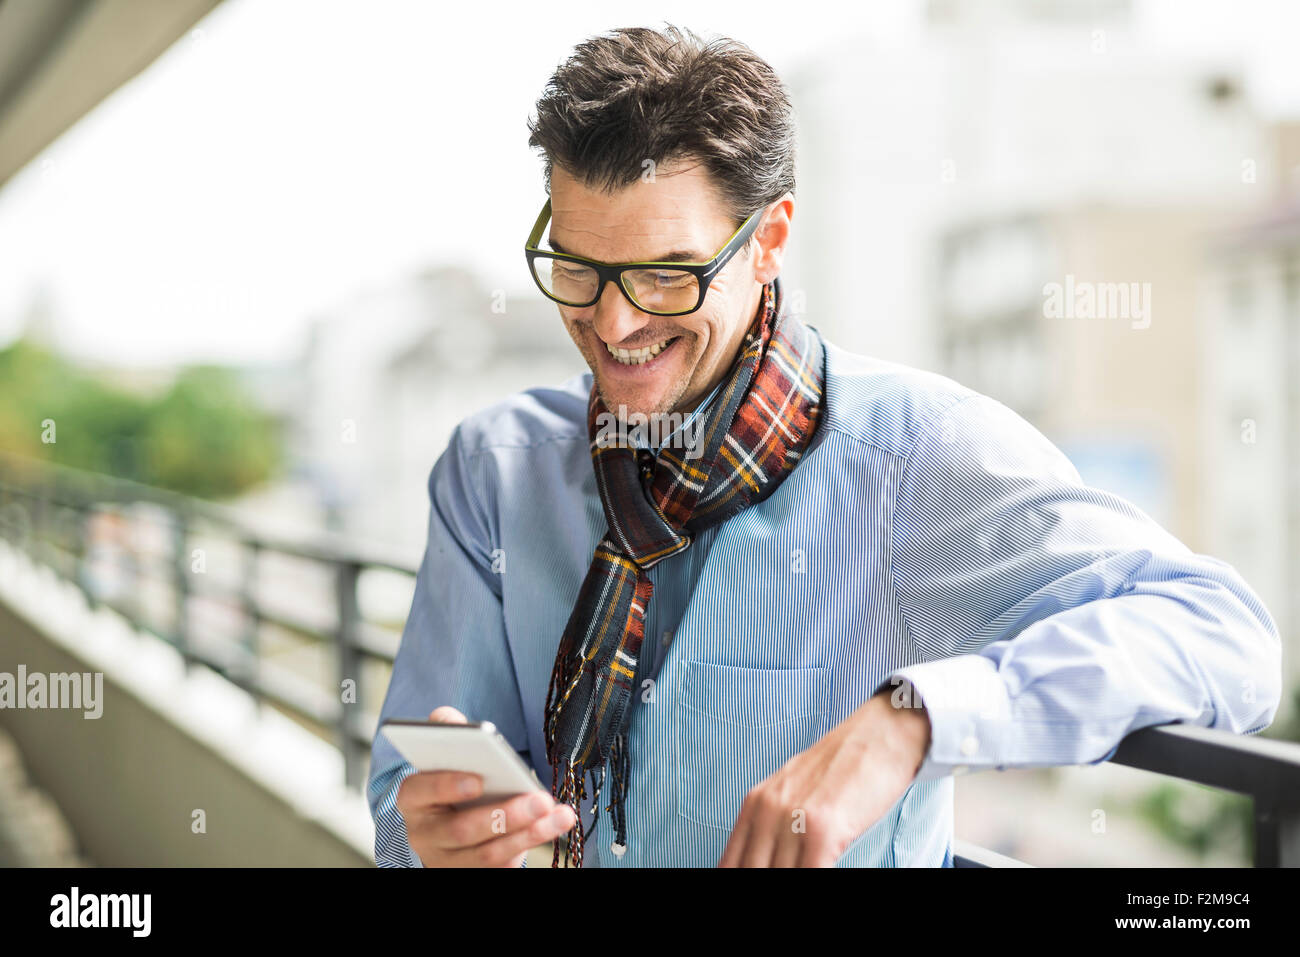 Smiling businessman looking at his smartphone Stock Photo